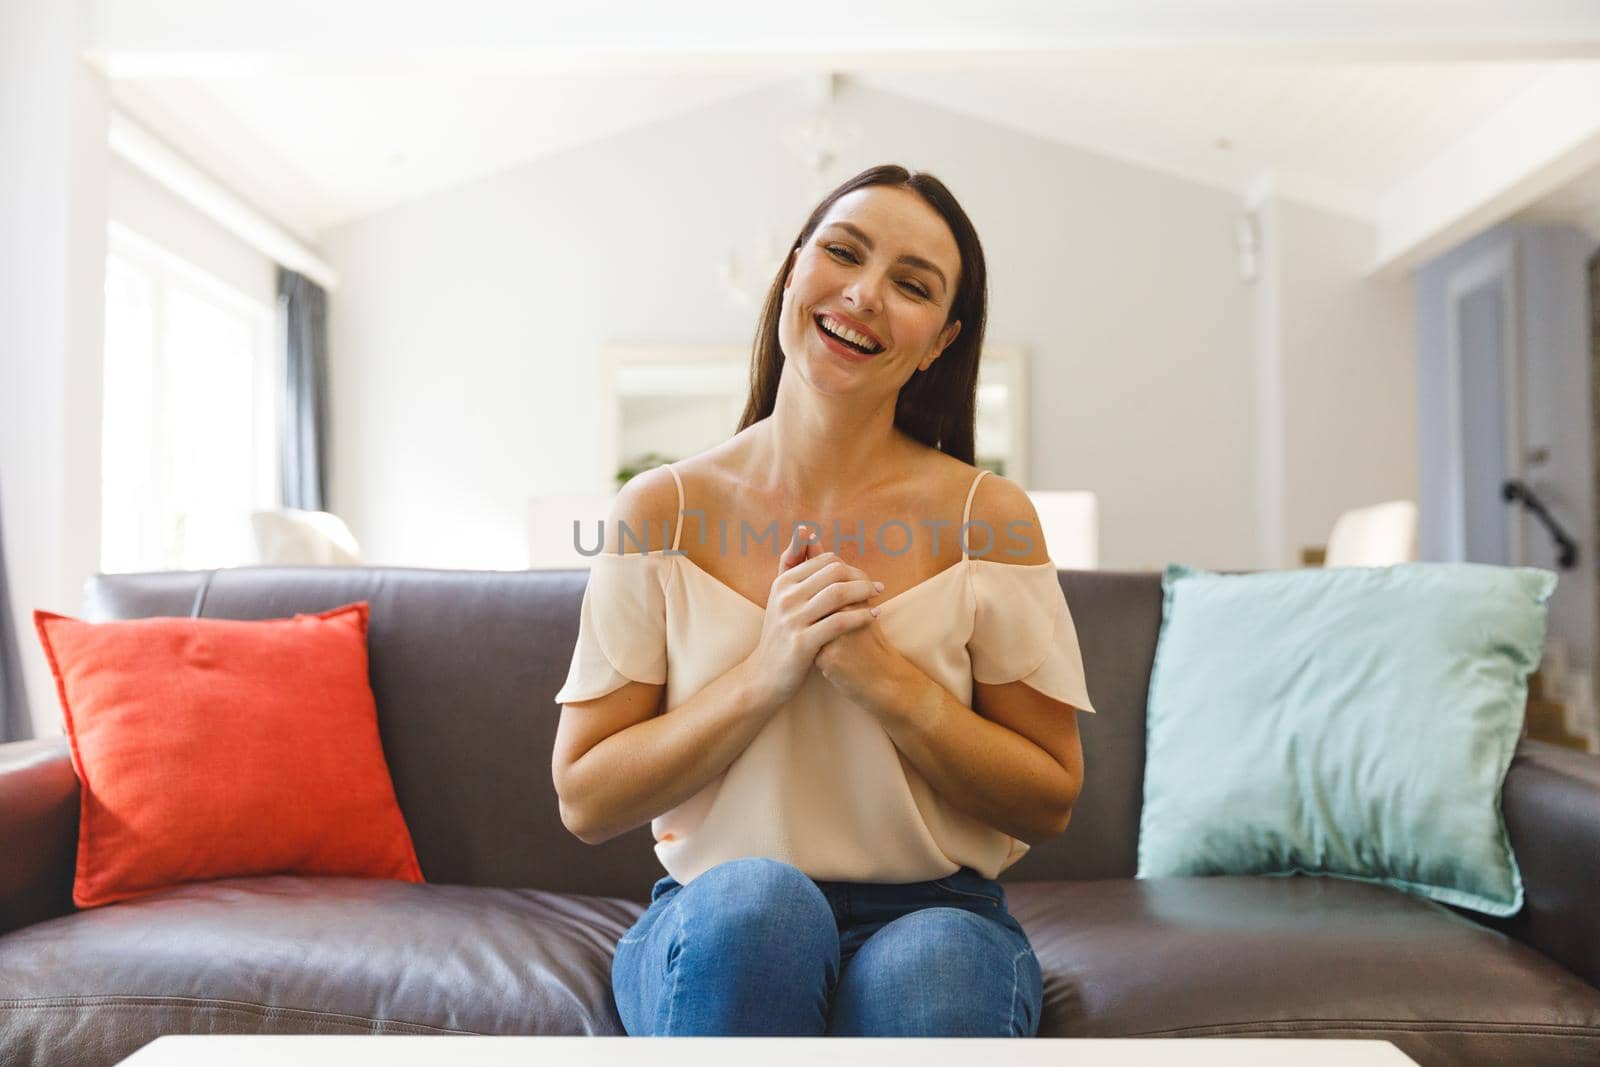 Caucasian woman sitting on couch having video call in living room, smiling. keeping in touch, leisure time at home with communication technology.